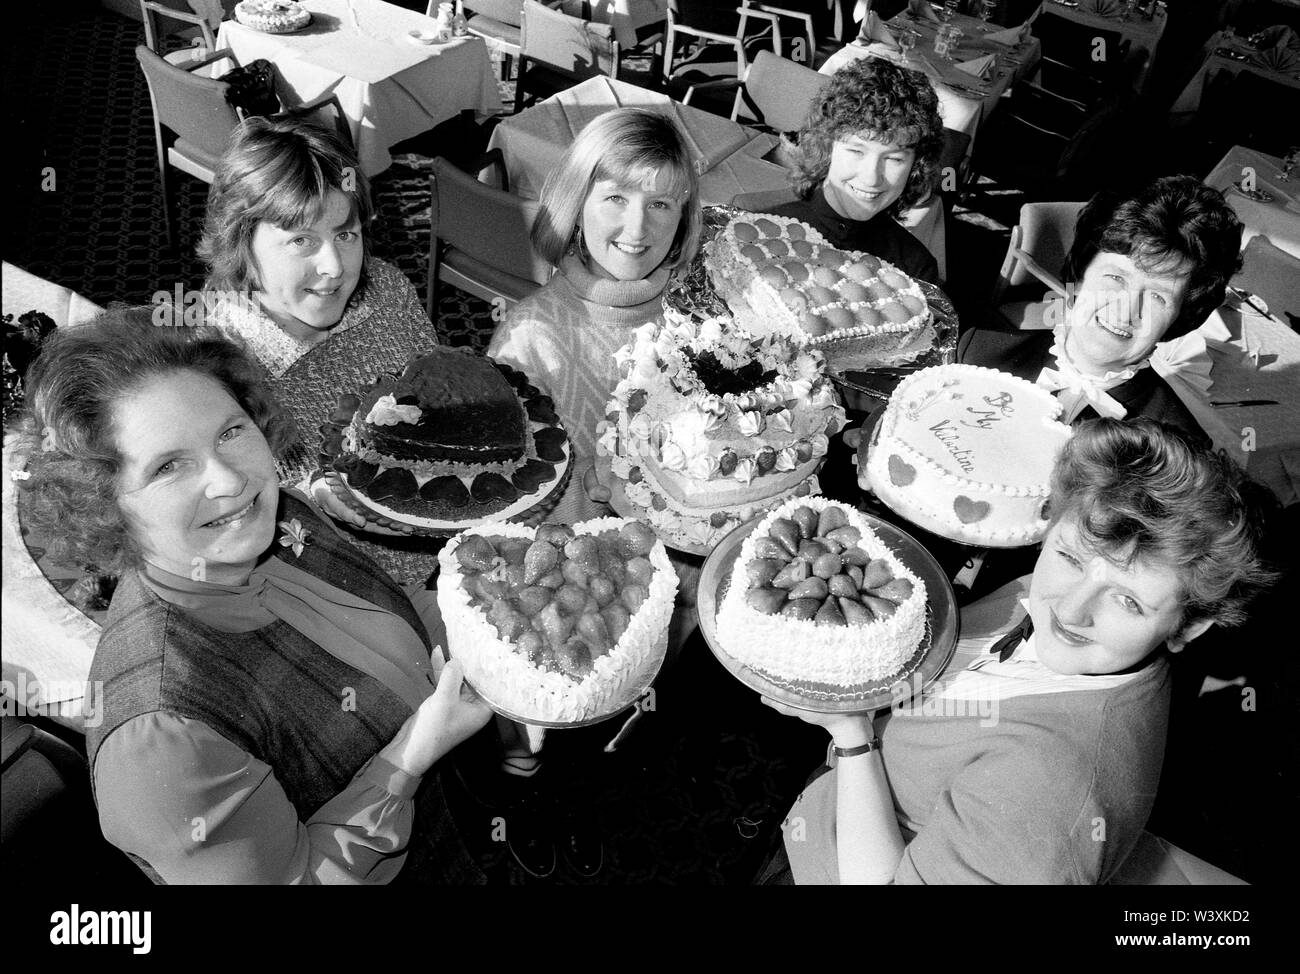 Ladies women with valentine cakes baked in 1985 Stock Photo